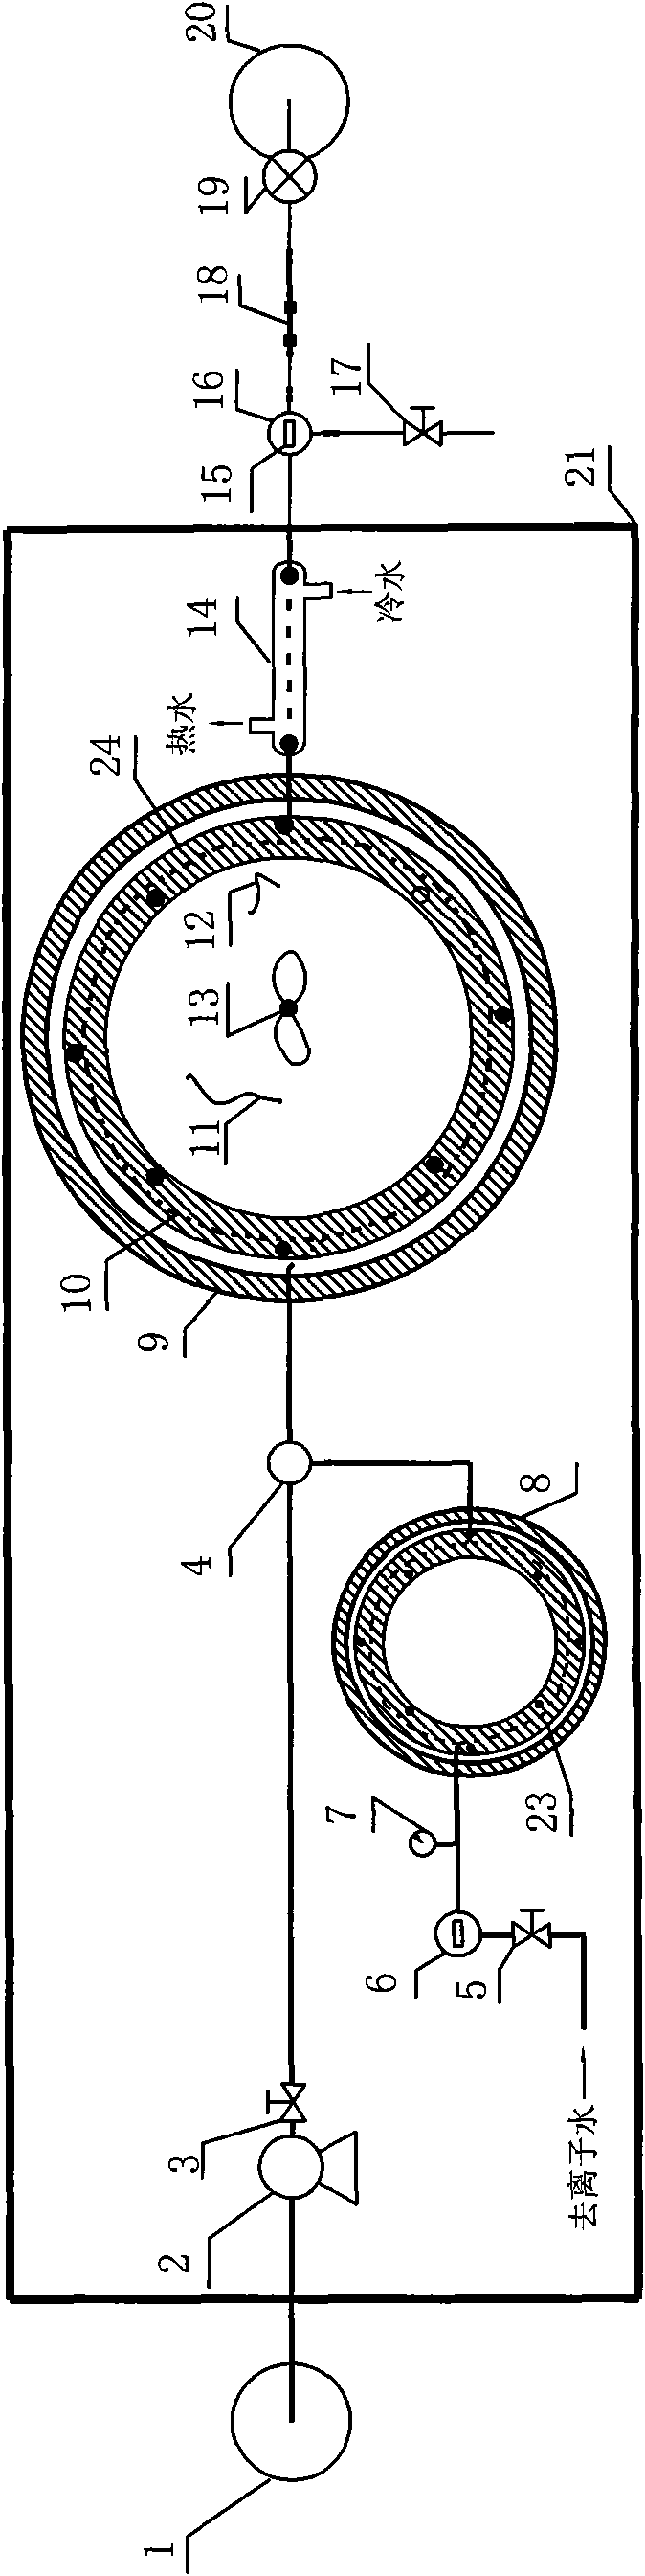 Device for continuously converting glycerine into lactic acid by using hydrothermal reaction